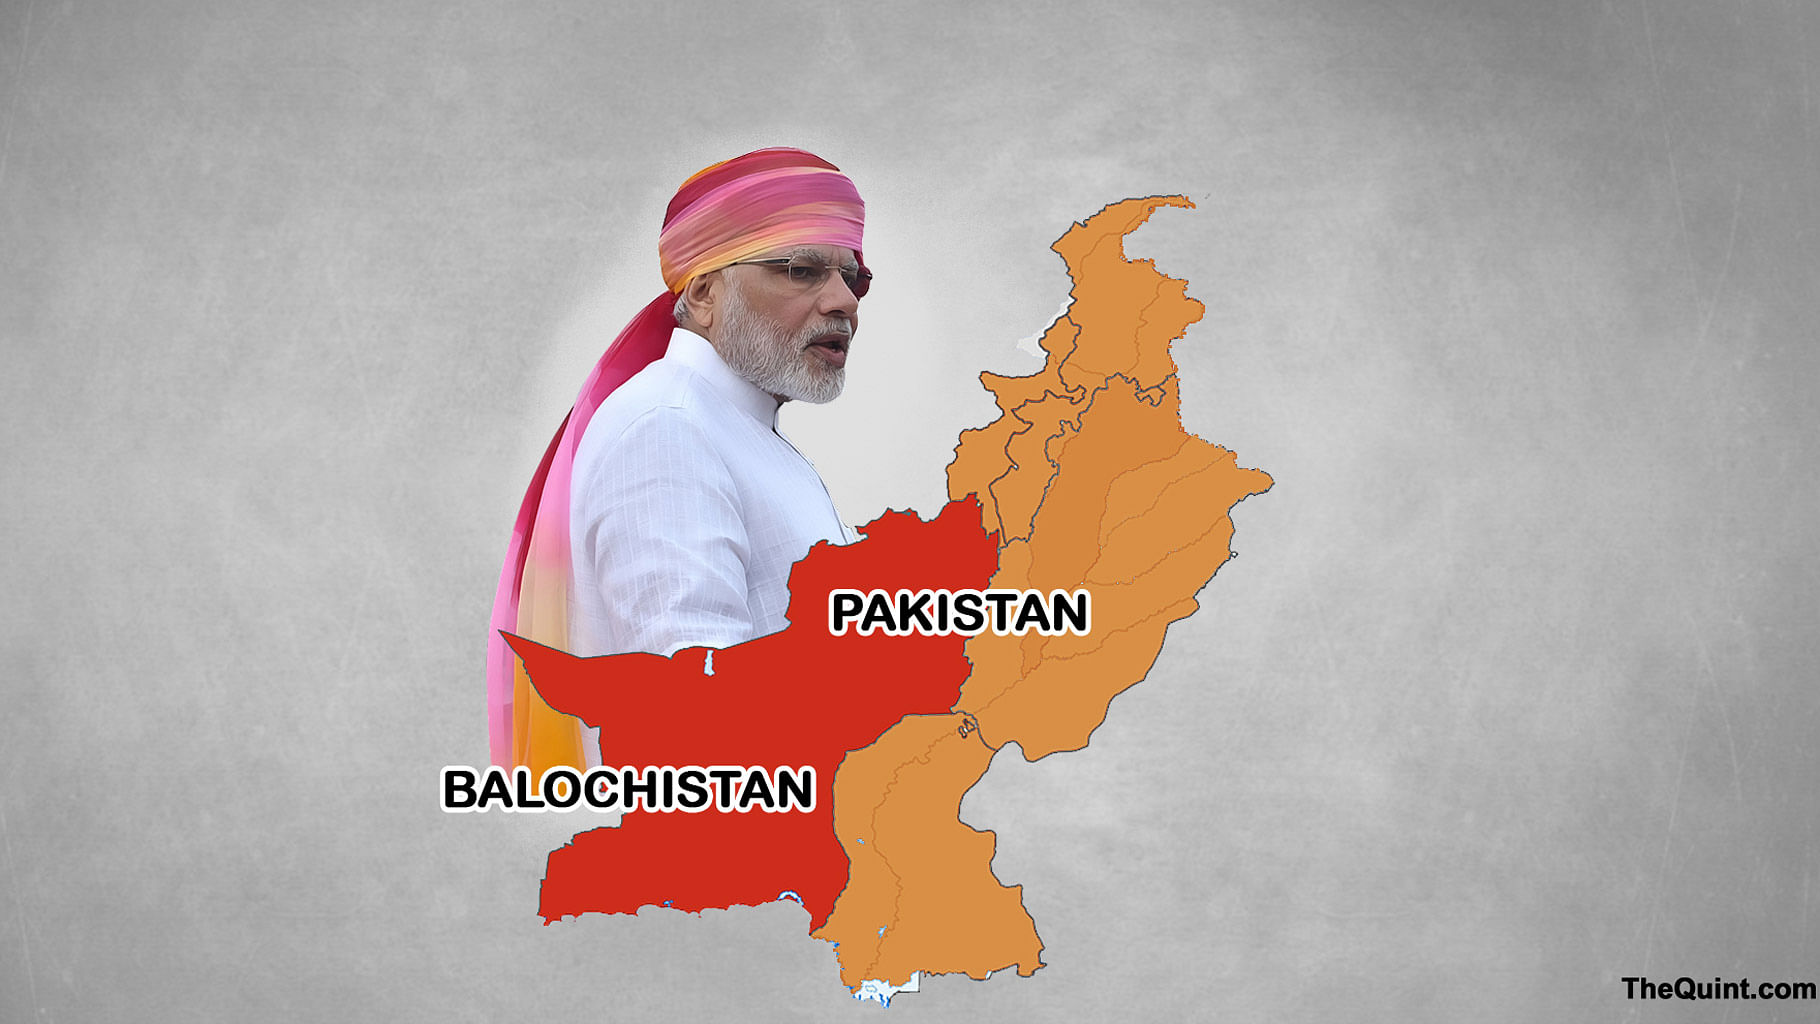 Modi said in his Independence Day speech that he would take up the cause of Baloch people. (Photo: Agencies/Altered by <b>The Quint</b>)